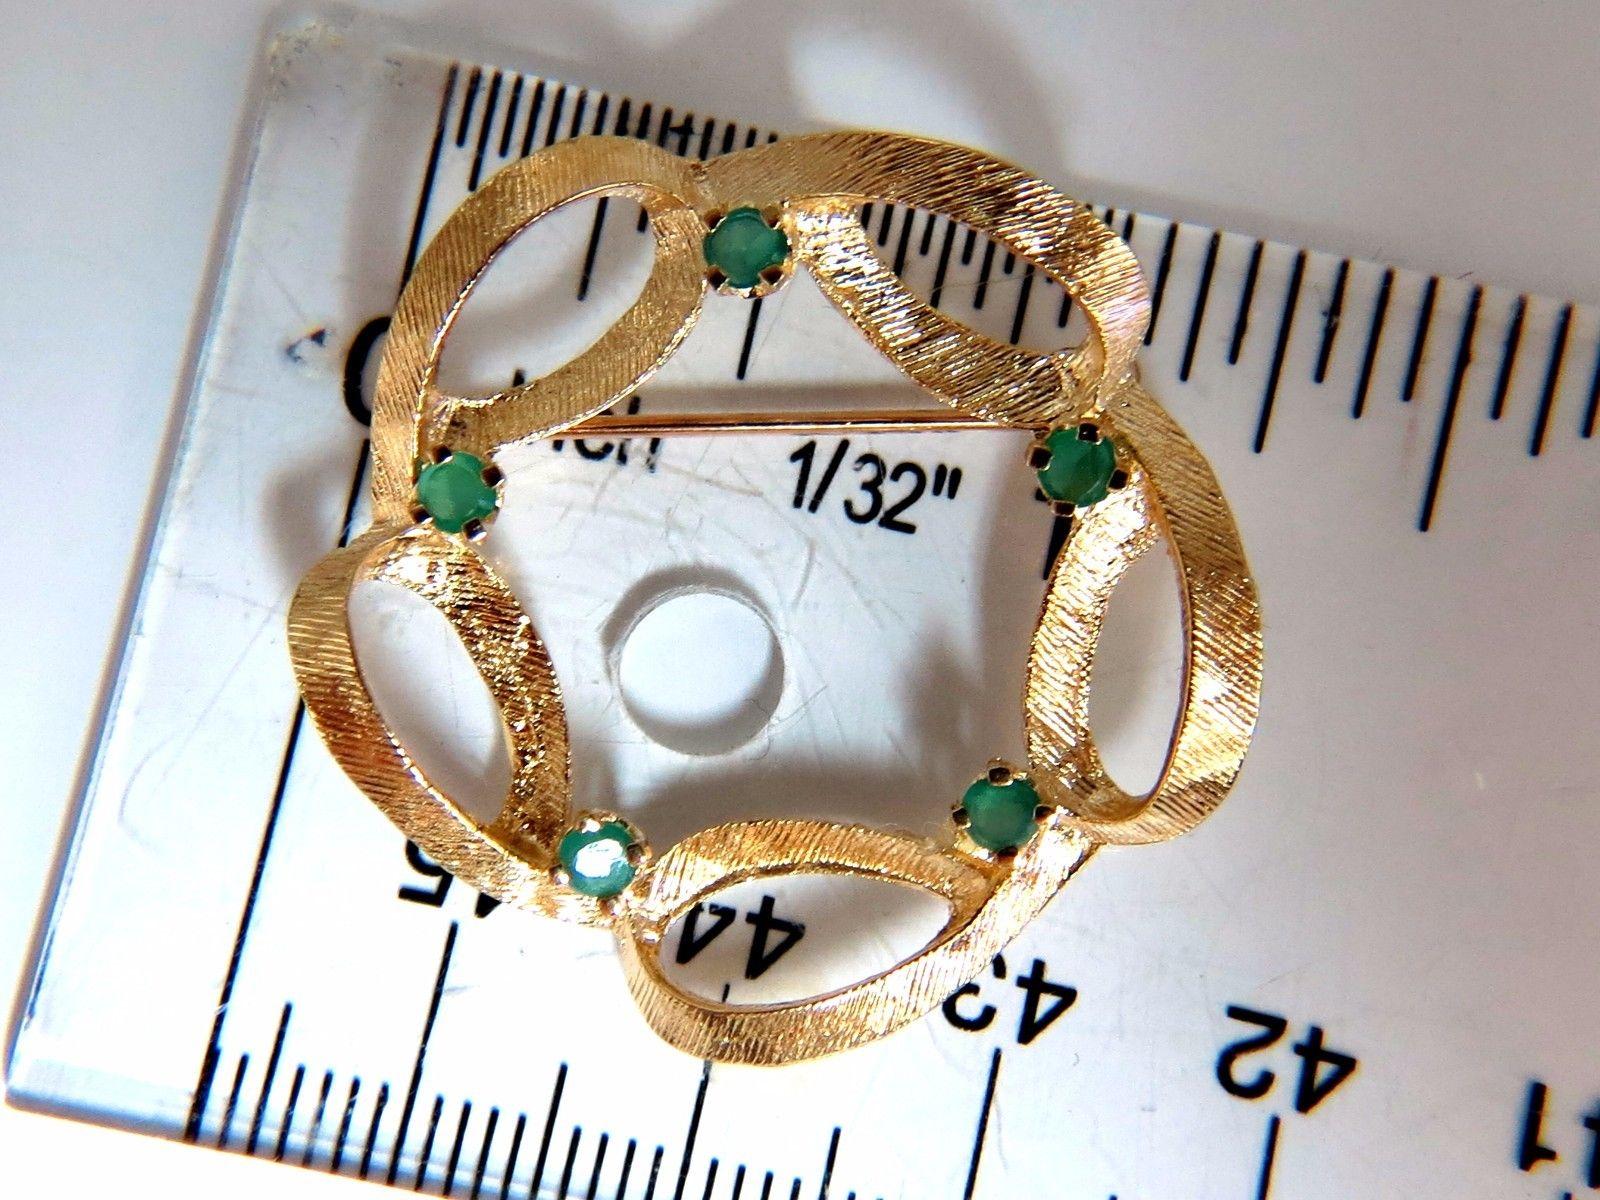 Emerald Circular Brooch

.25ct. natural emeralds

Rounds, Full cut Brilliant.

14kt yellow gold 

4.5 grams.

Overall: 1.3 inch diameter